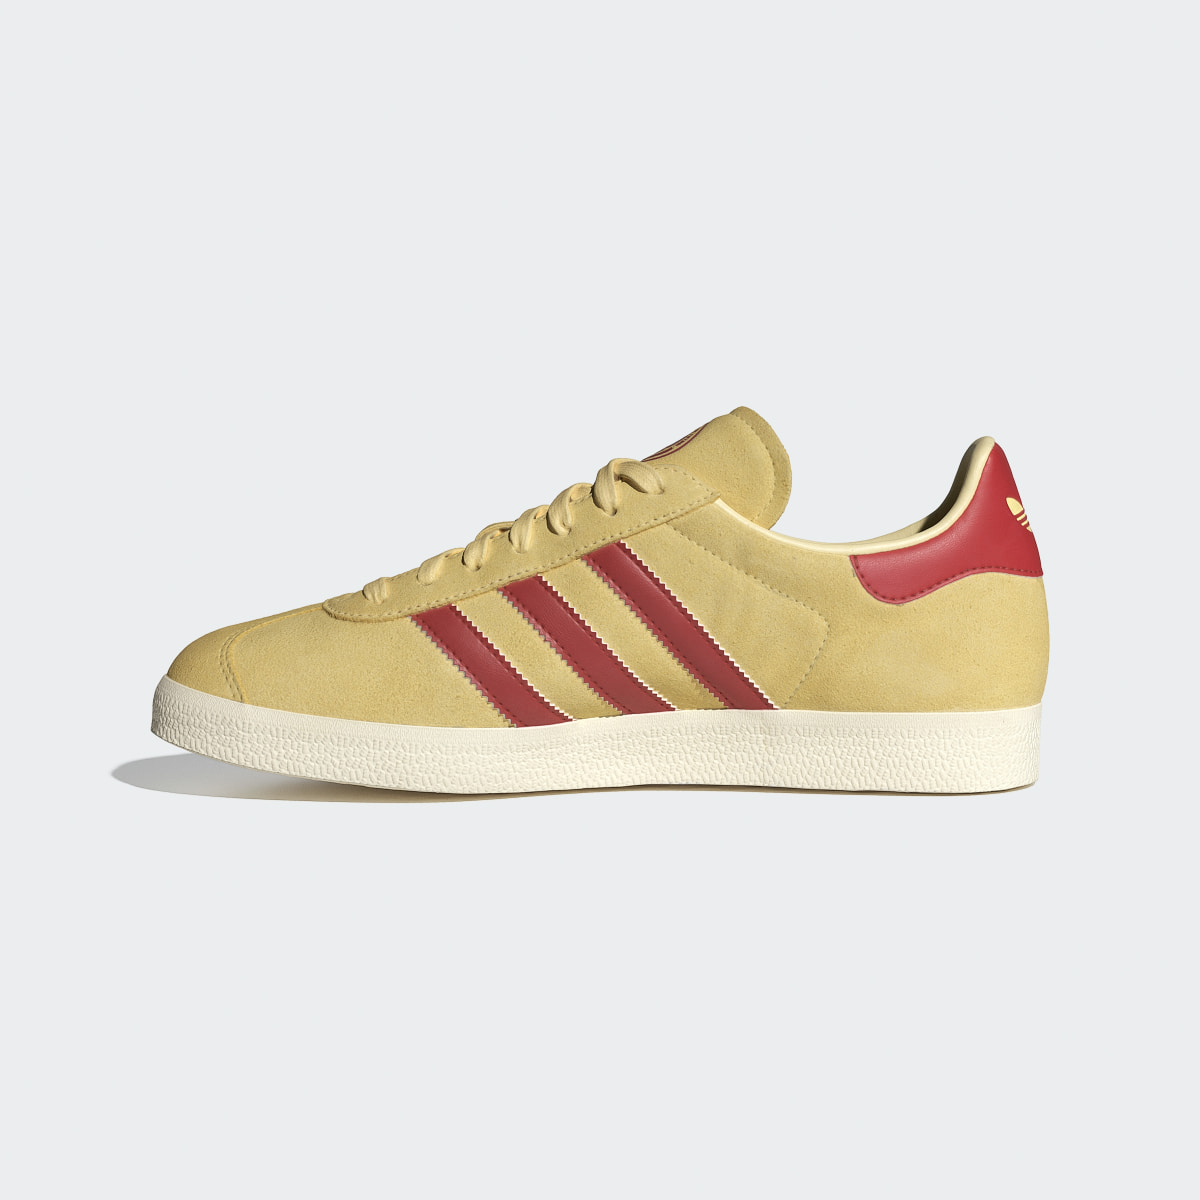 Adidas Gazelle Colombia Shoes. 7